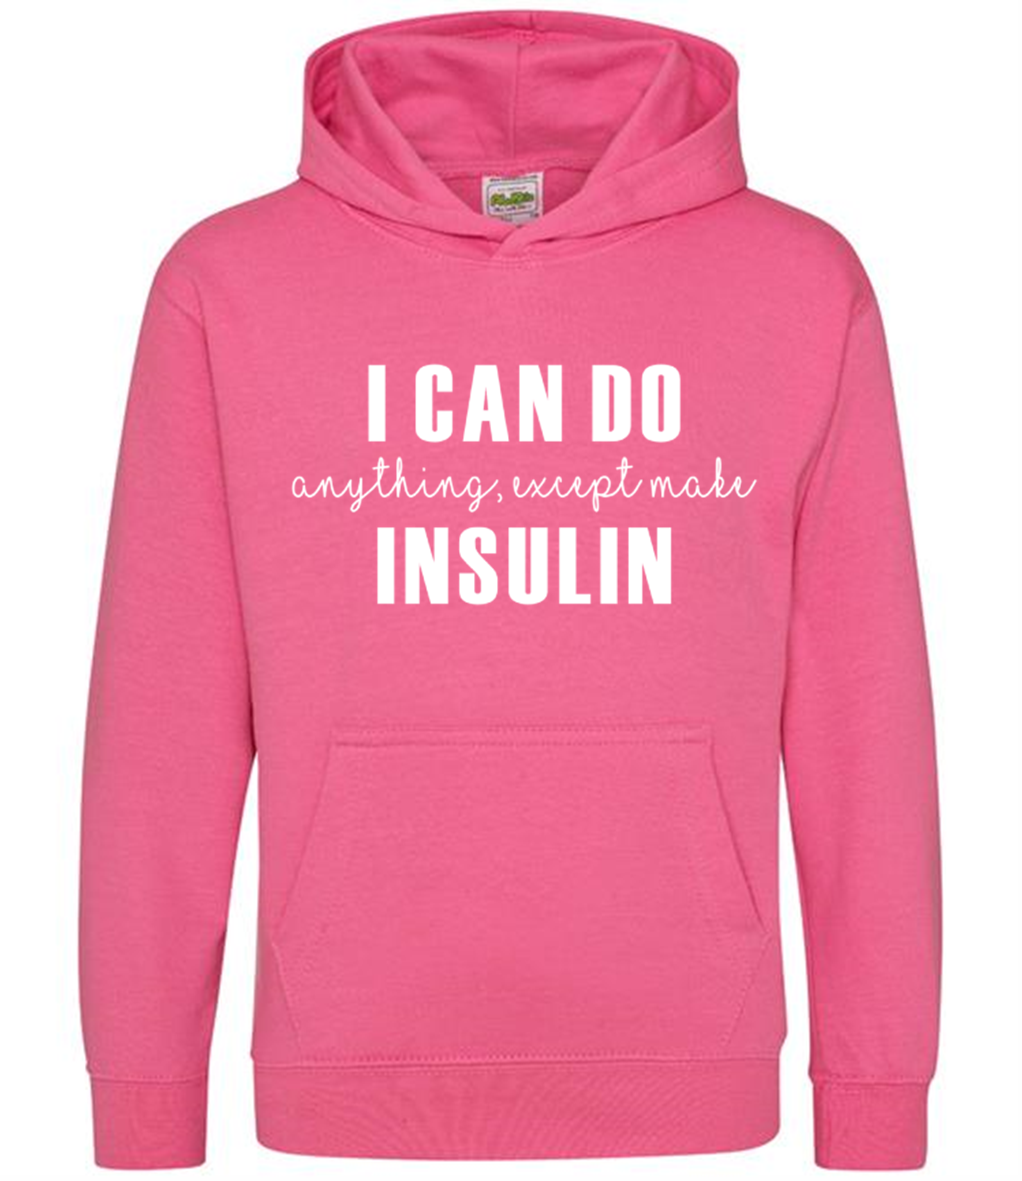 I Can Do Anything, Except Make Insulin Kids Hoodie